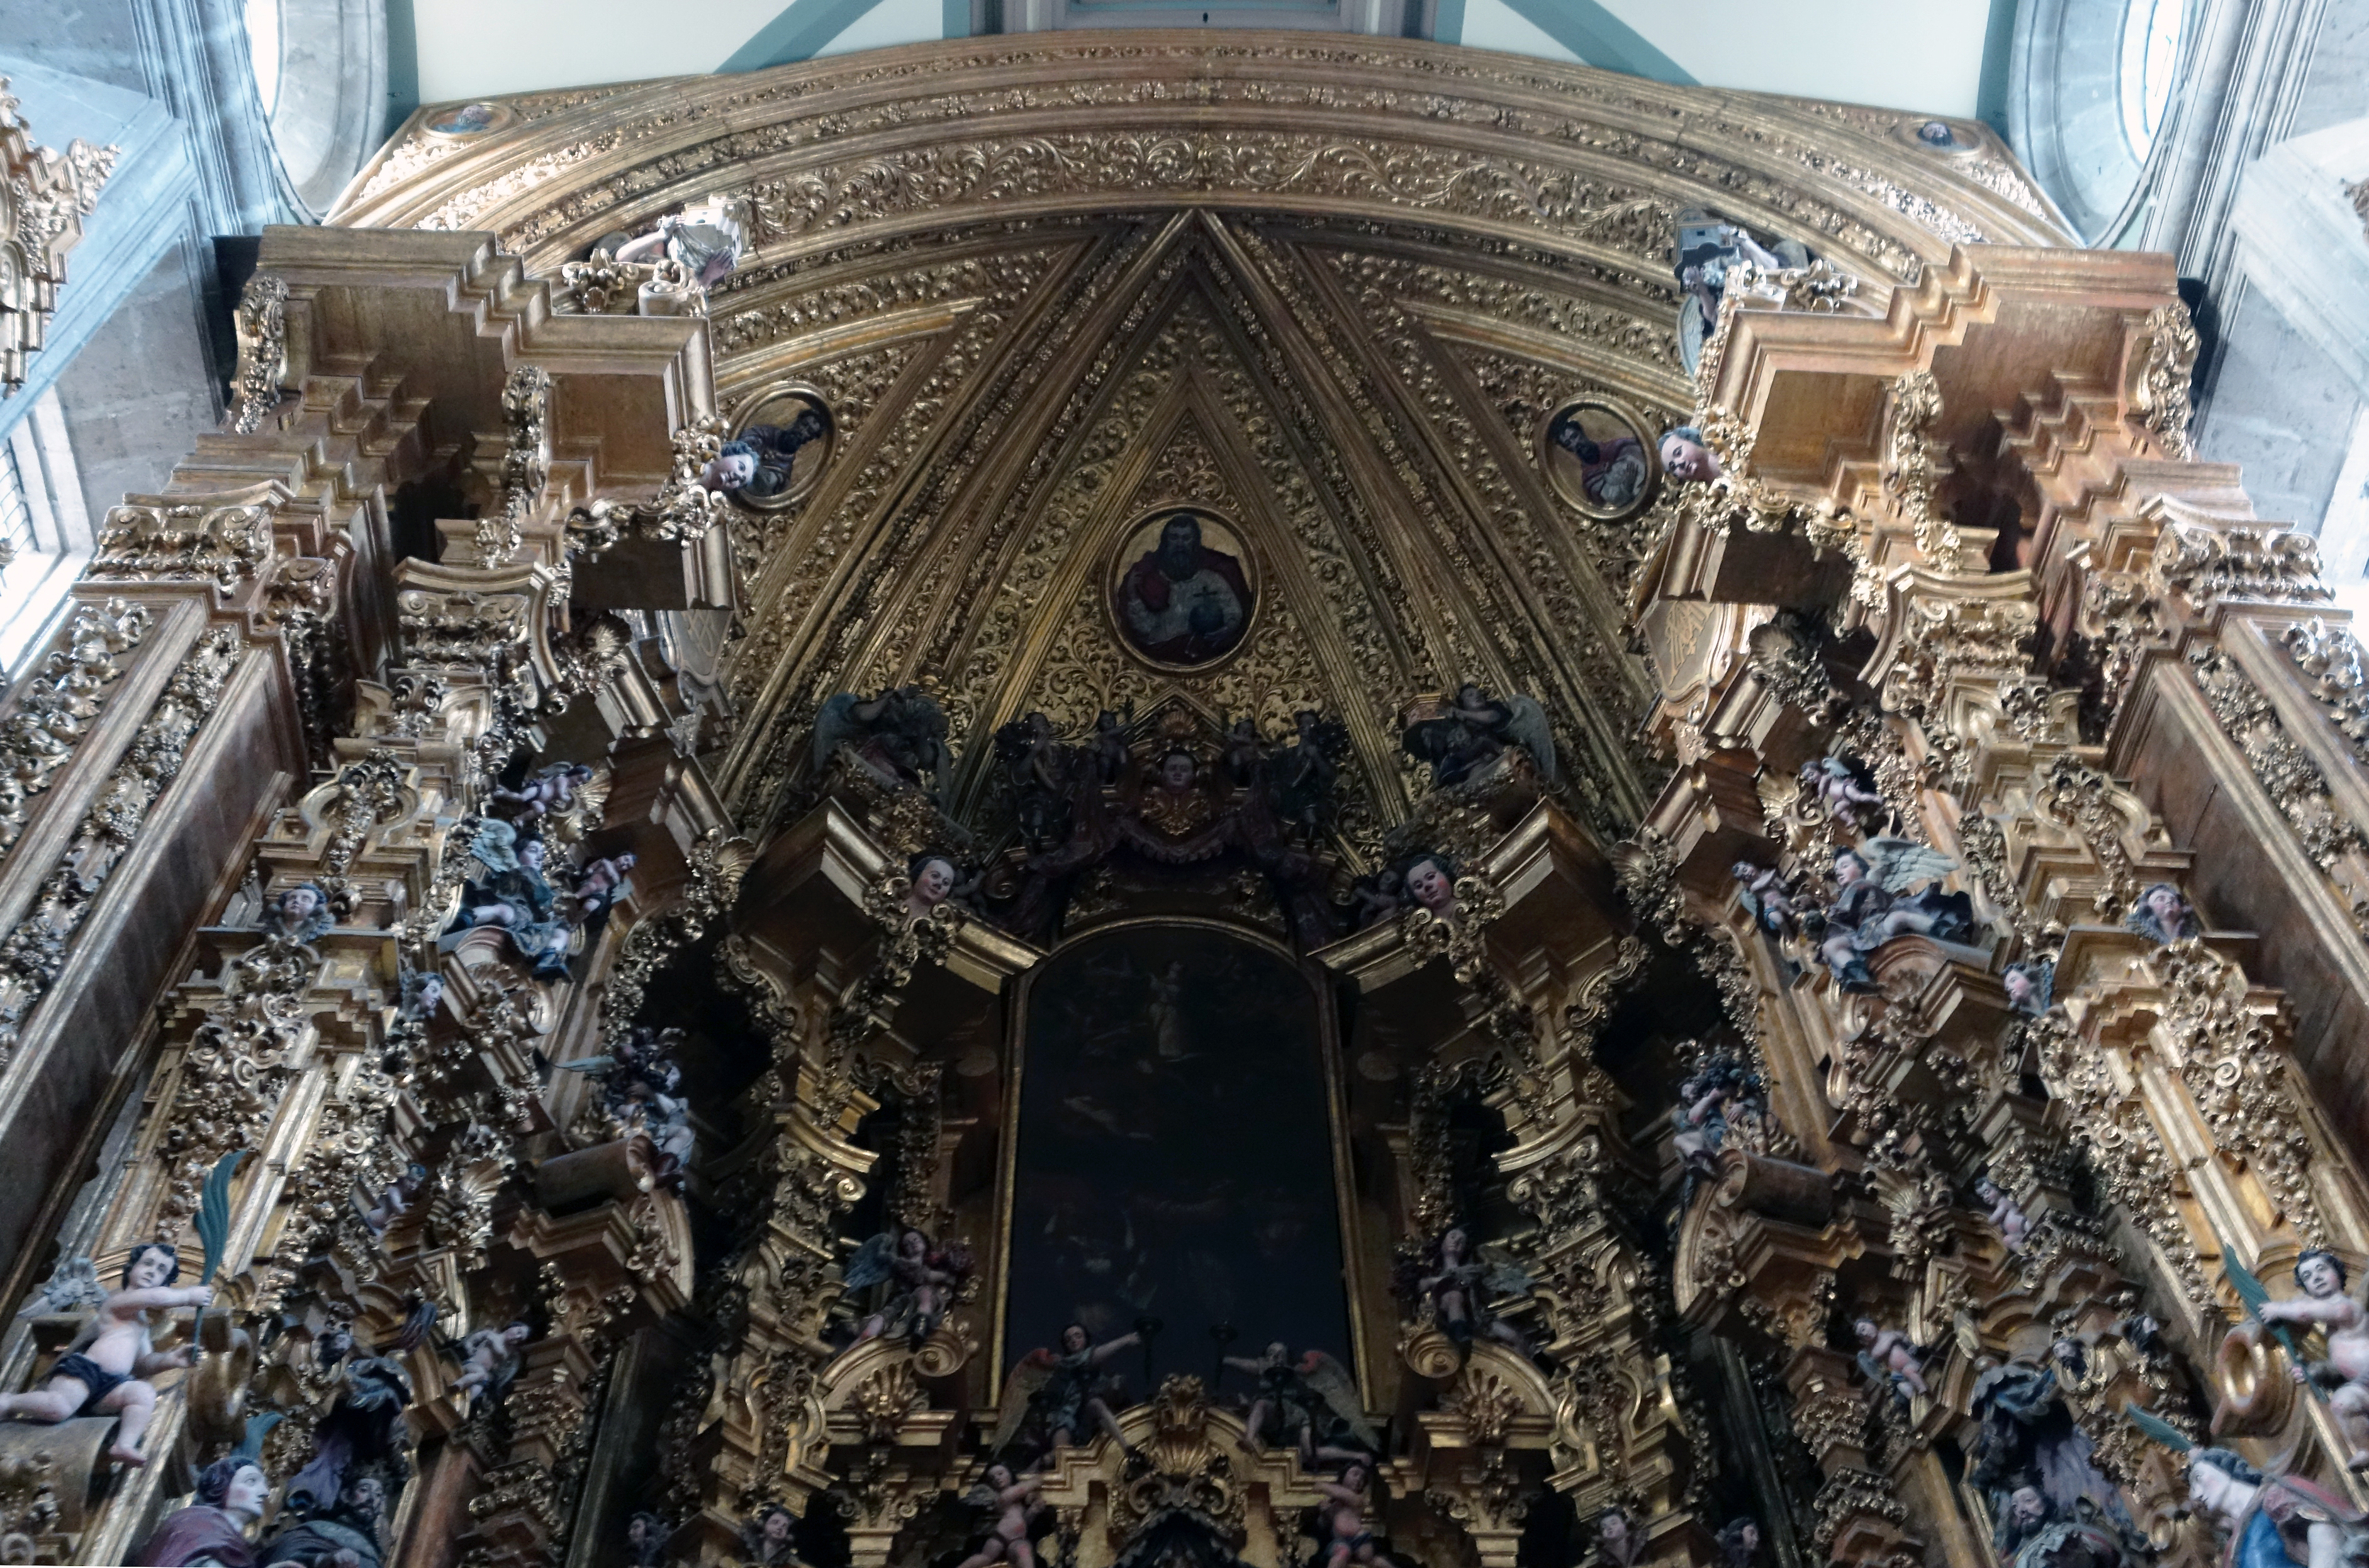 Jerónimo de Balbás, Altar of the Kings (Altar de los Reyes), 1718-37, Metropolitan Cathedral of the Assumption of the Most Blessed Virgin Mary (Mexico City)